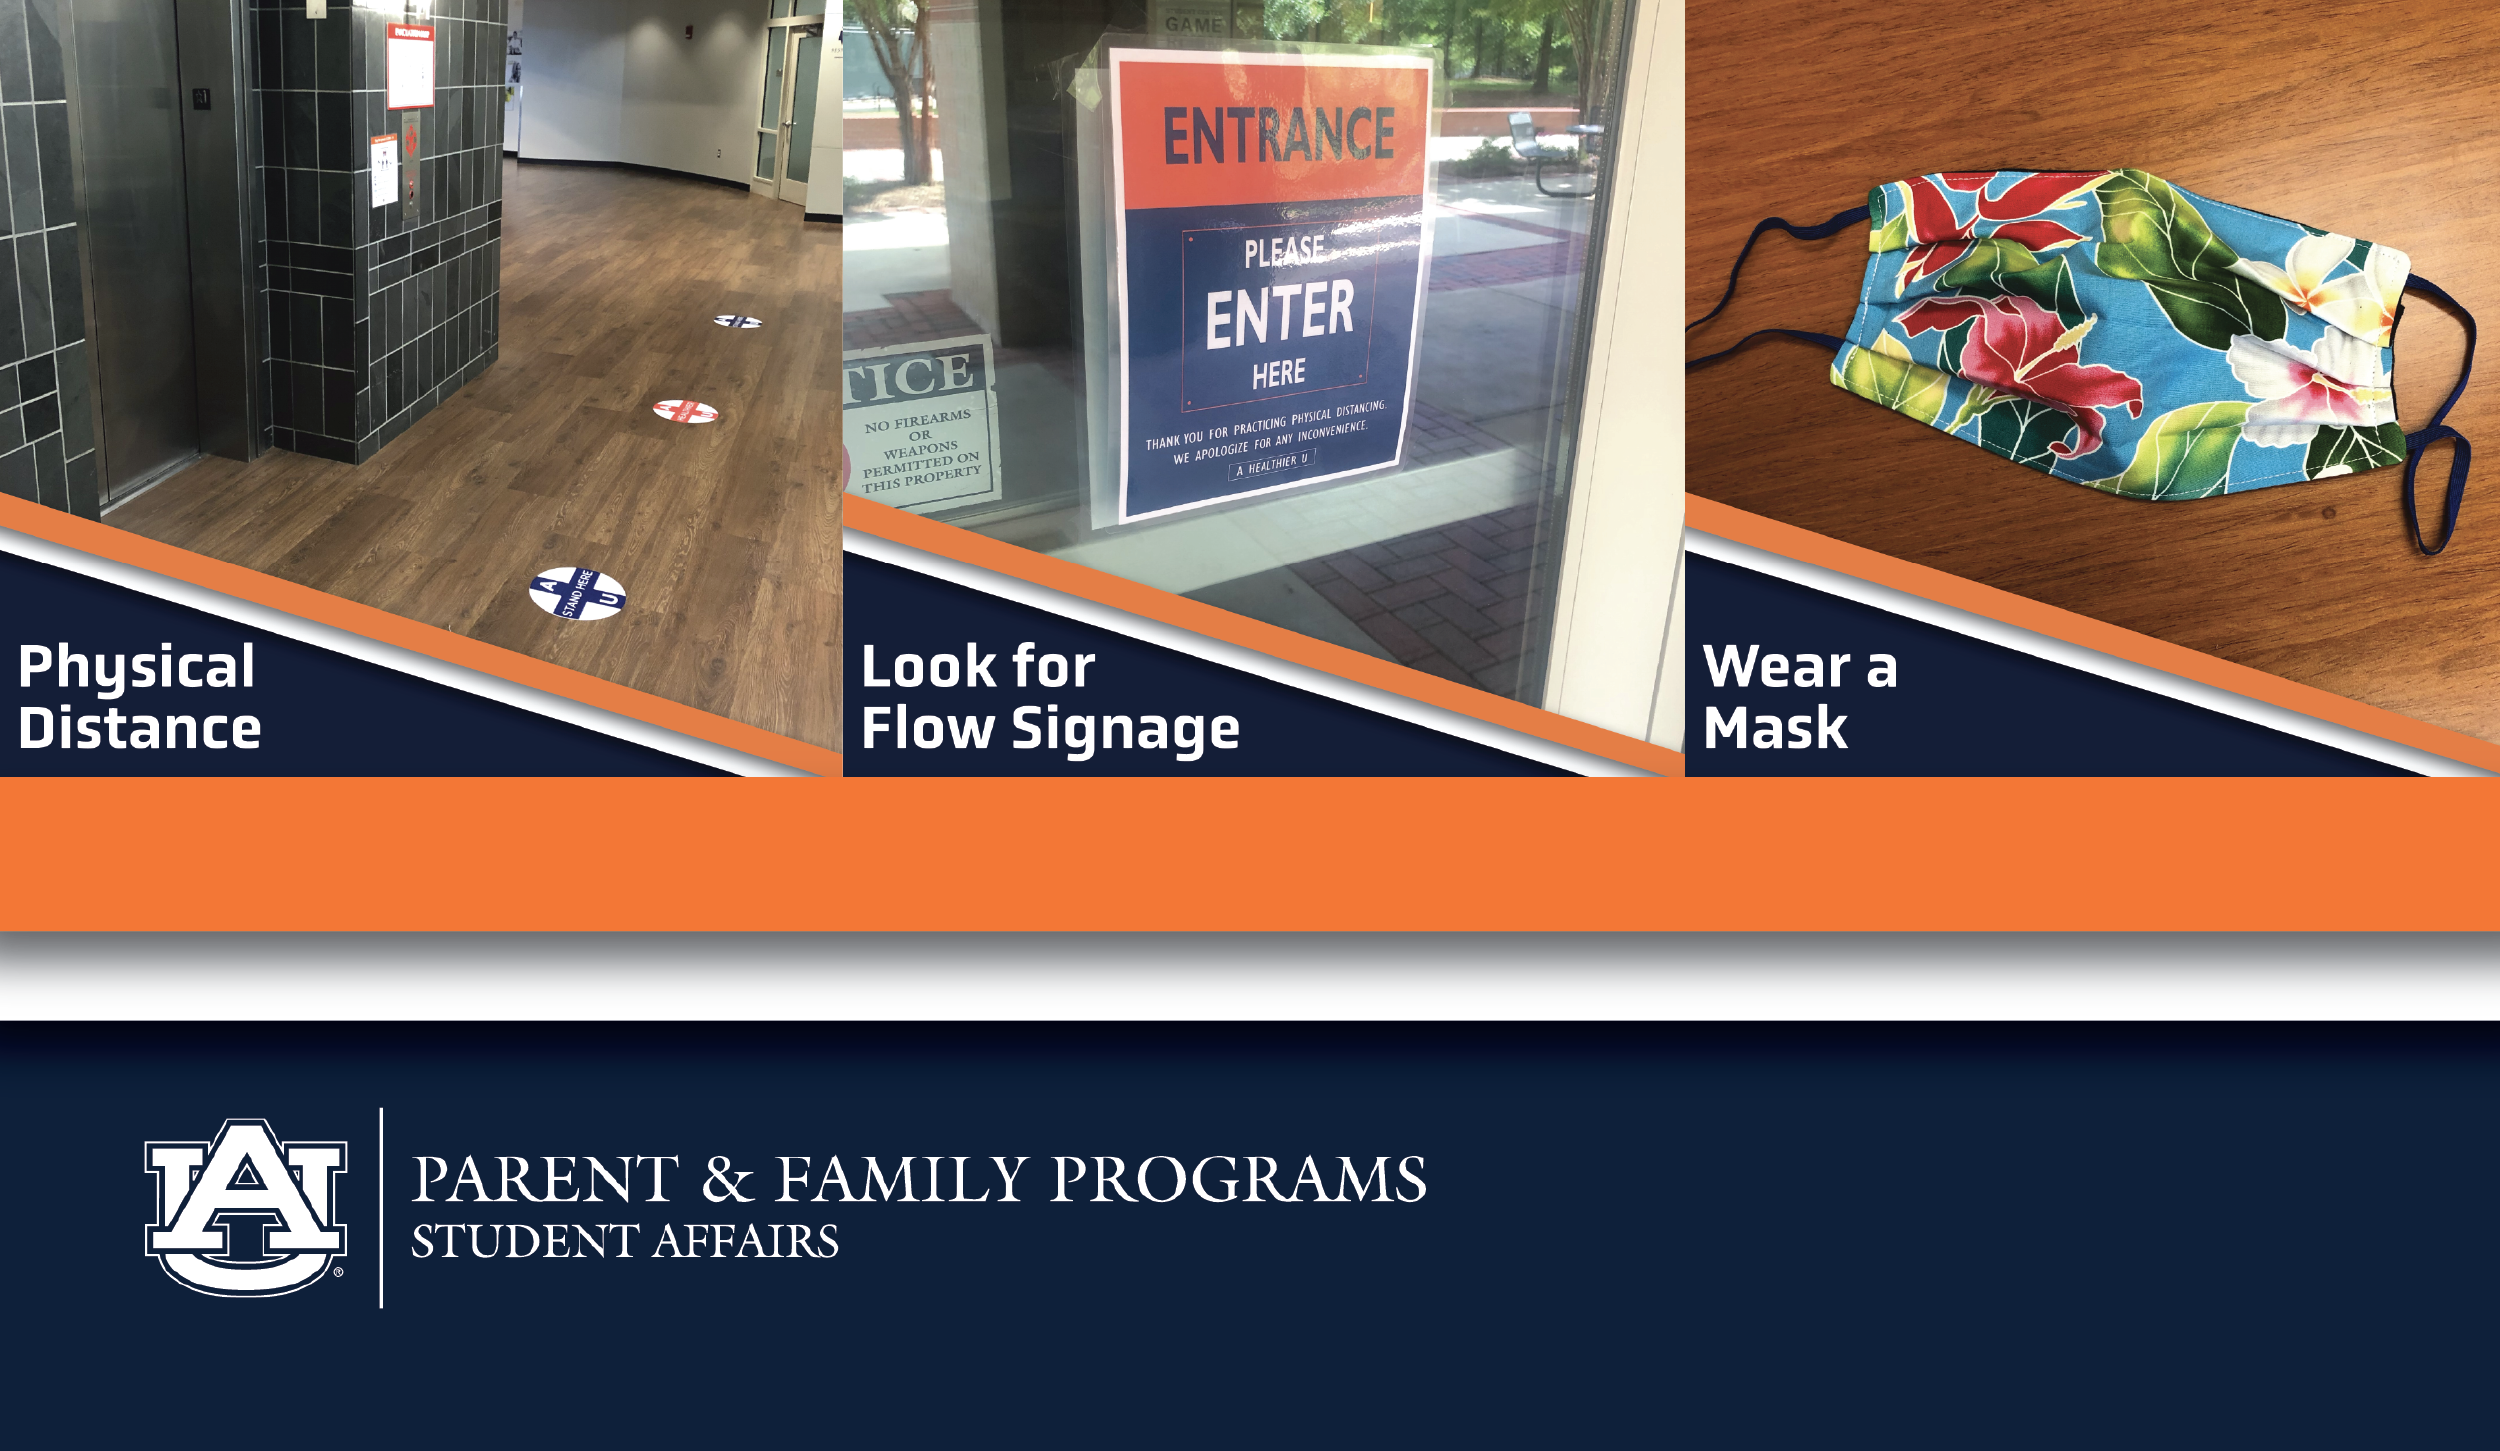 Things to Look for on Campus The Auburn Parent & Family Experience